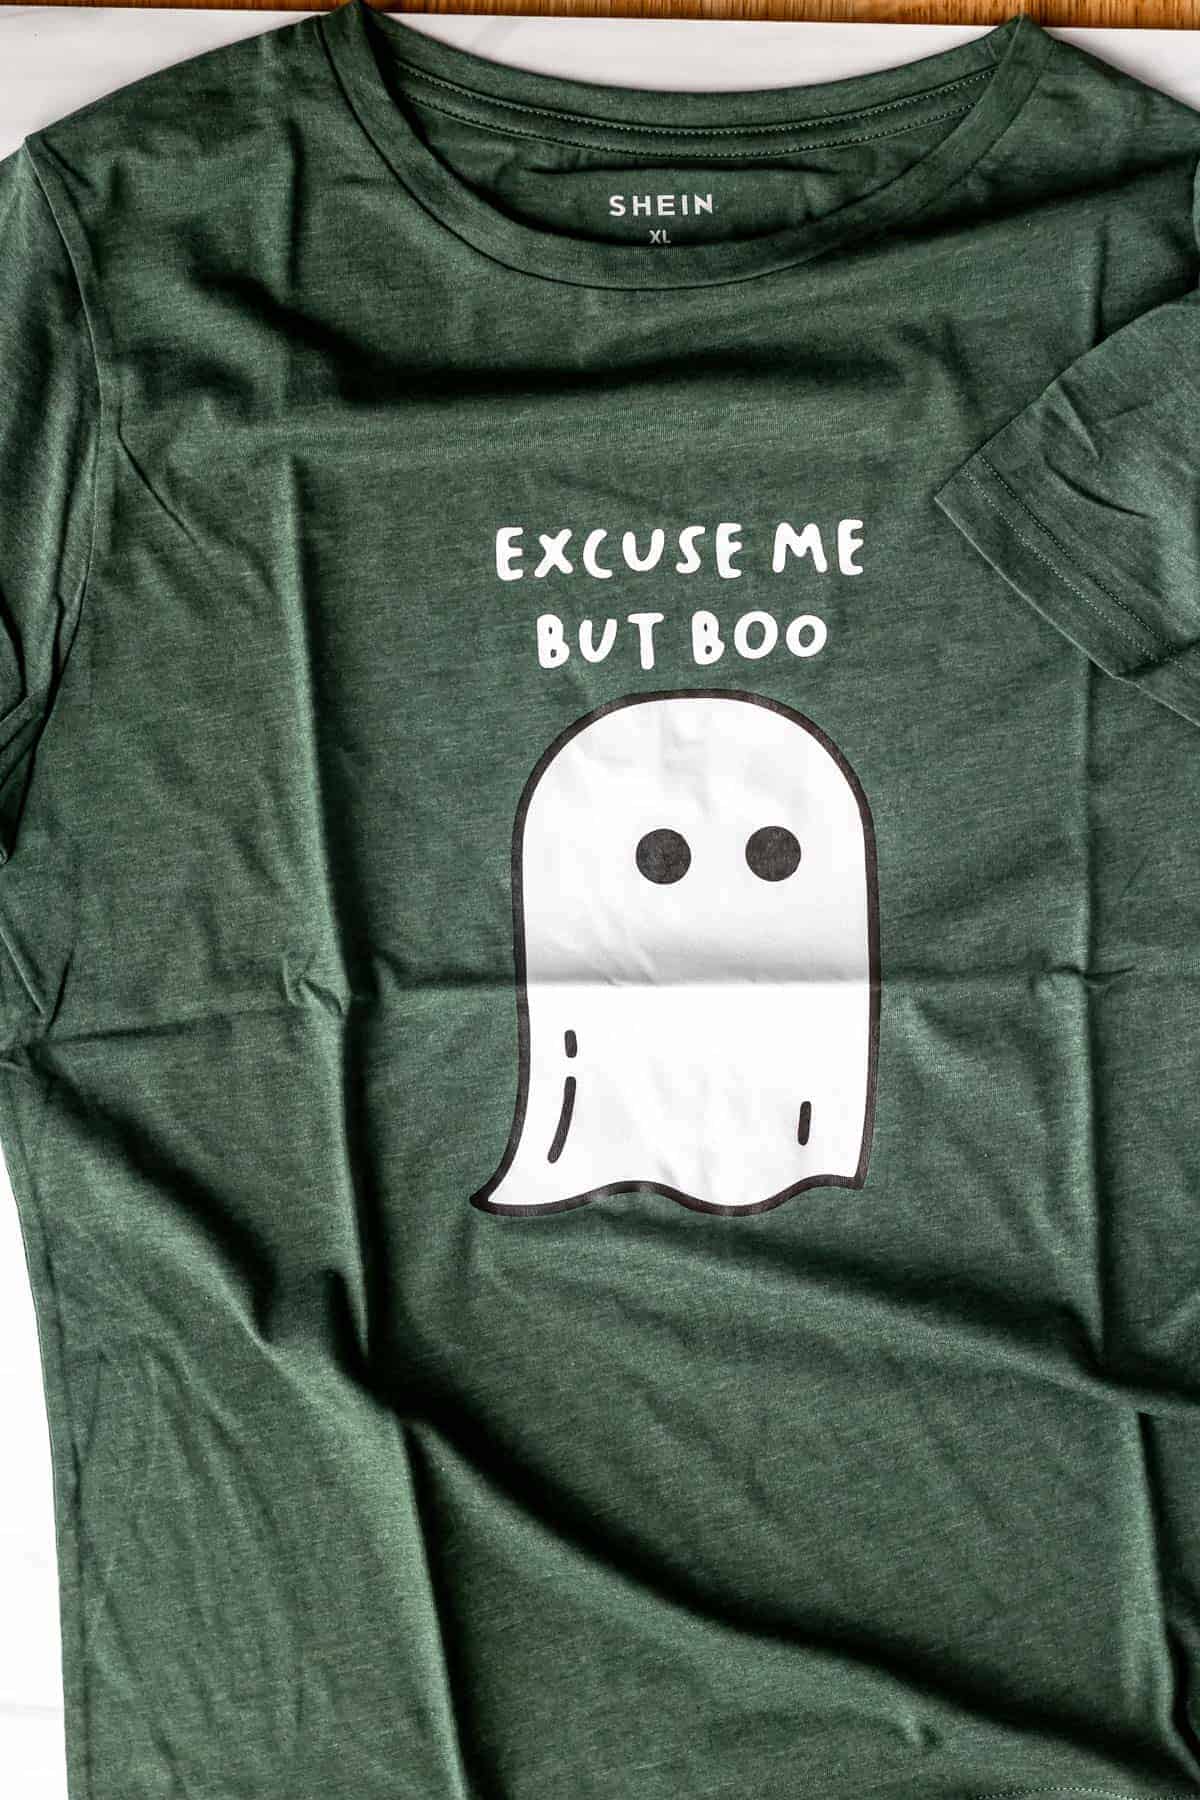 Shein Ghost And Slogan Graphic Tee in green.